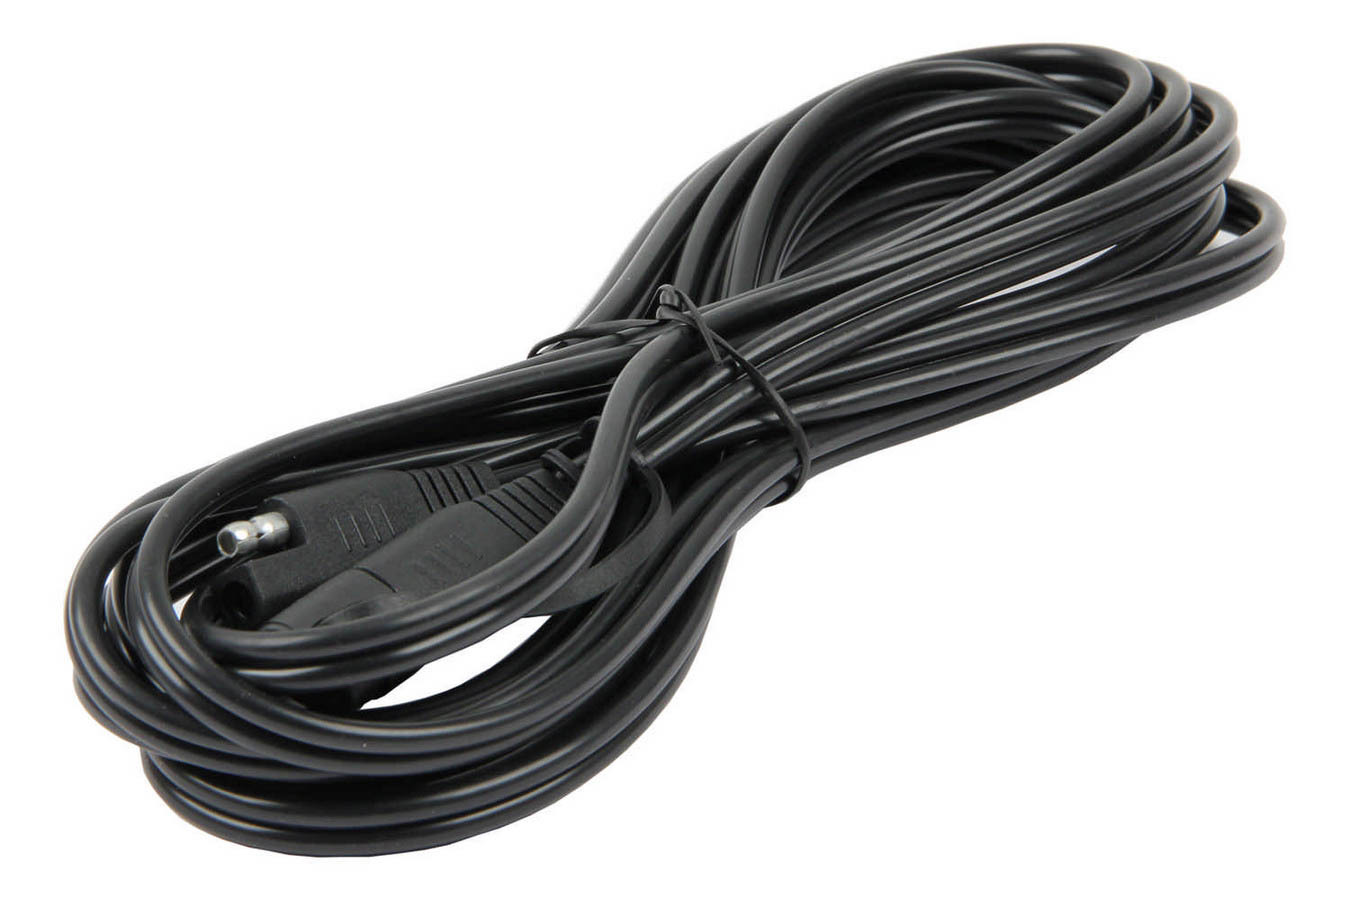 BATTERY TENDER Battery Charger Harness, Battery Tender Extension Lead, 25 ft Long, Quick Connect, 12V Models Only, Black Quic